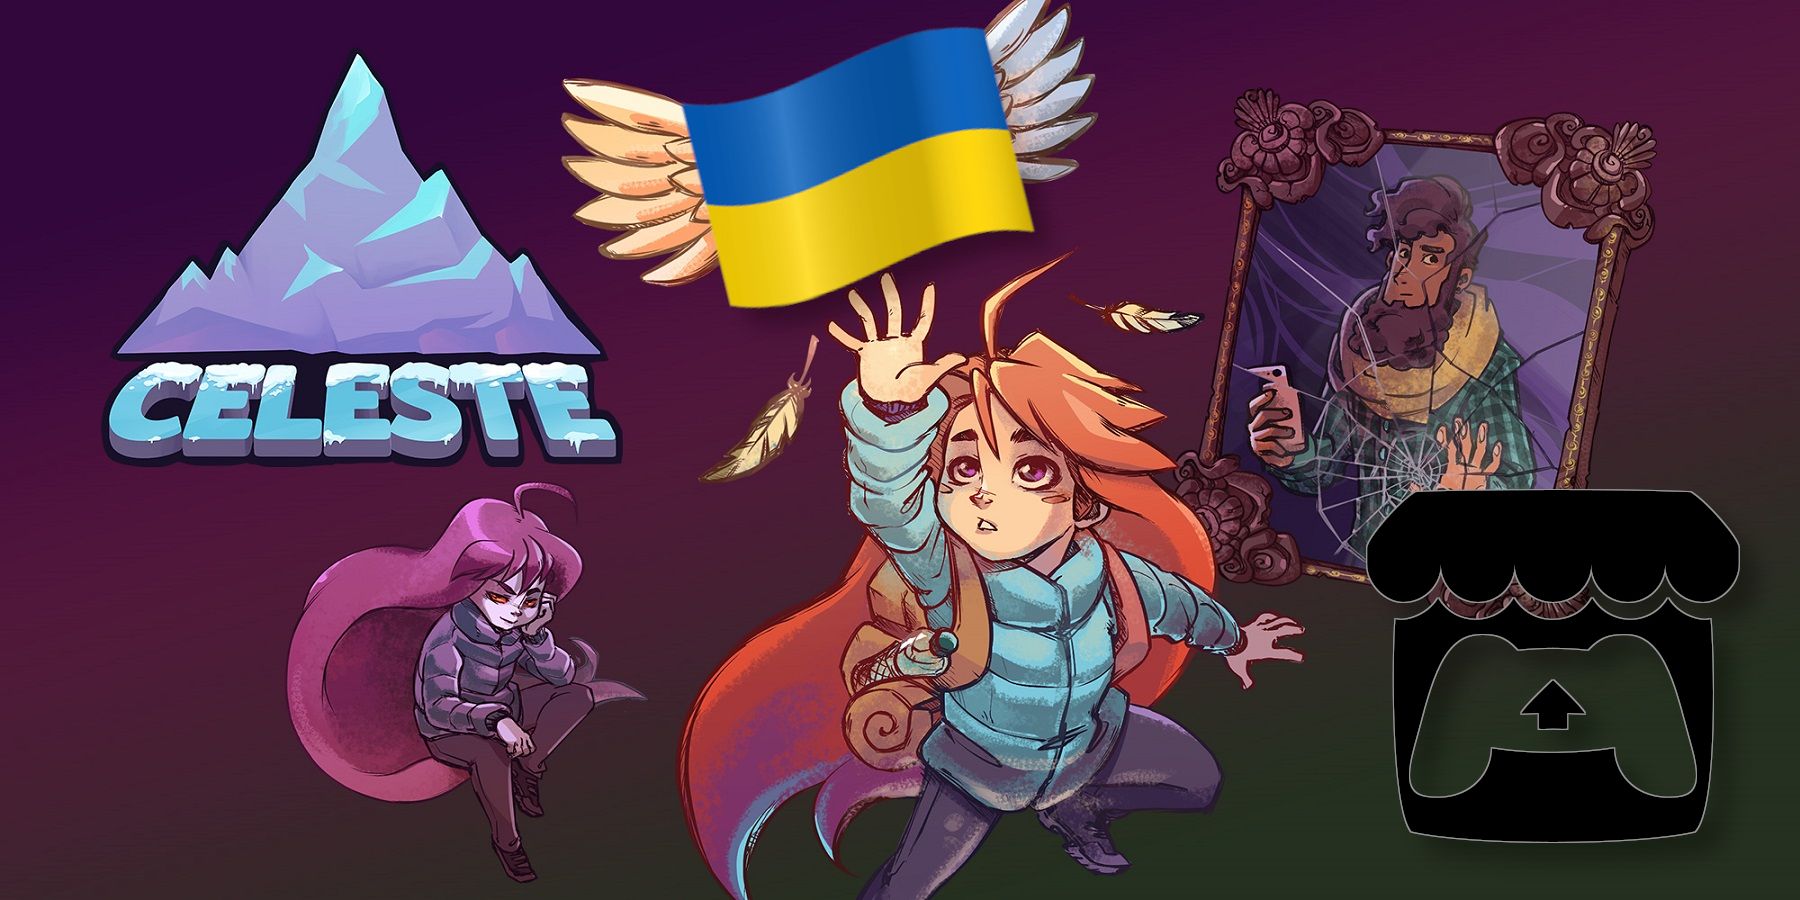 Almost 1000 Things In The itch.io Bundle For Ukraine - PC Perspective